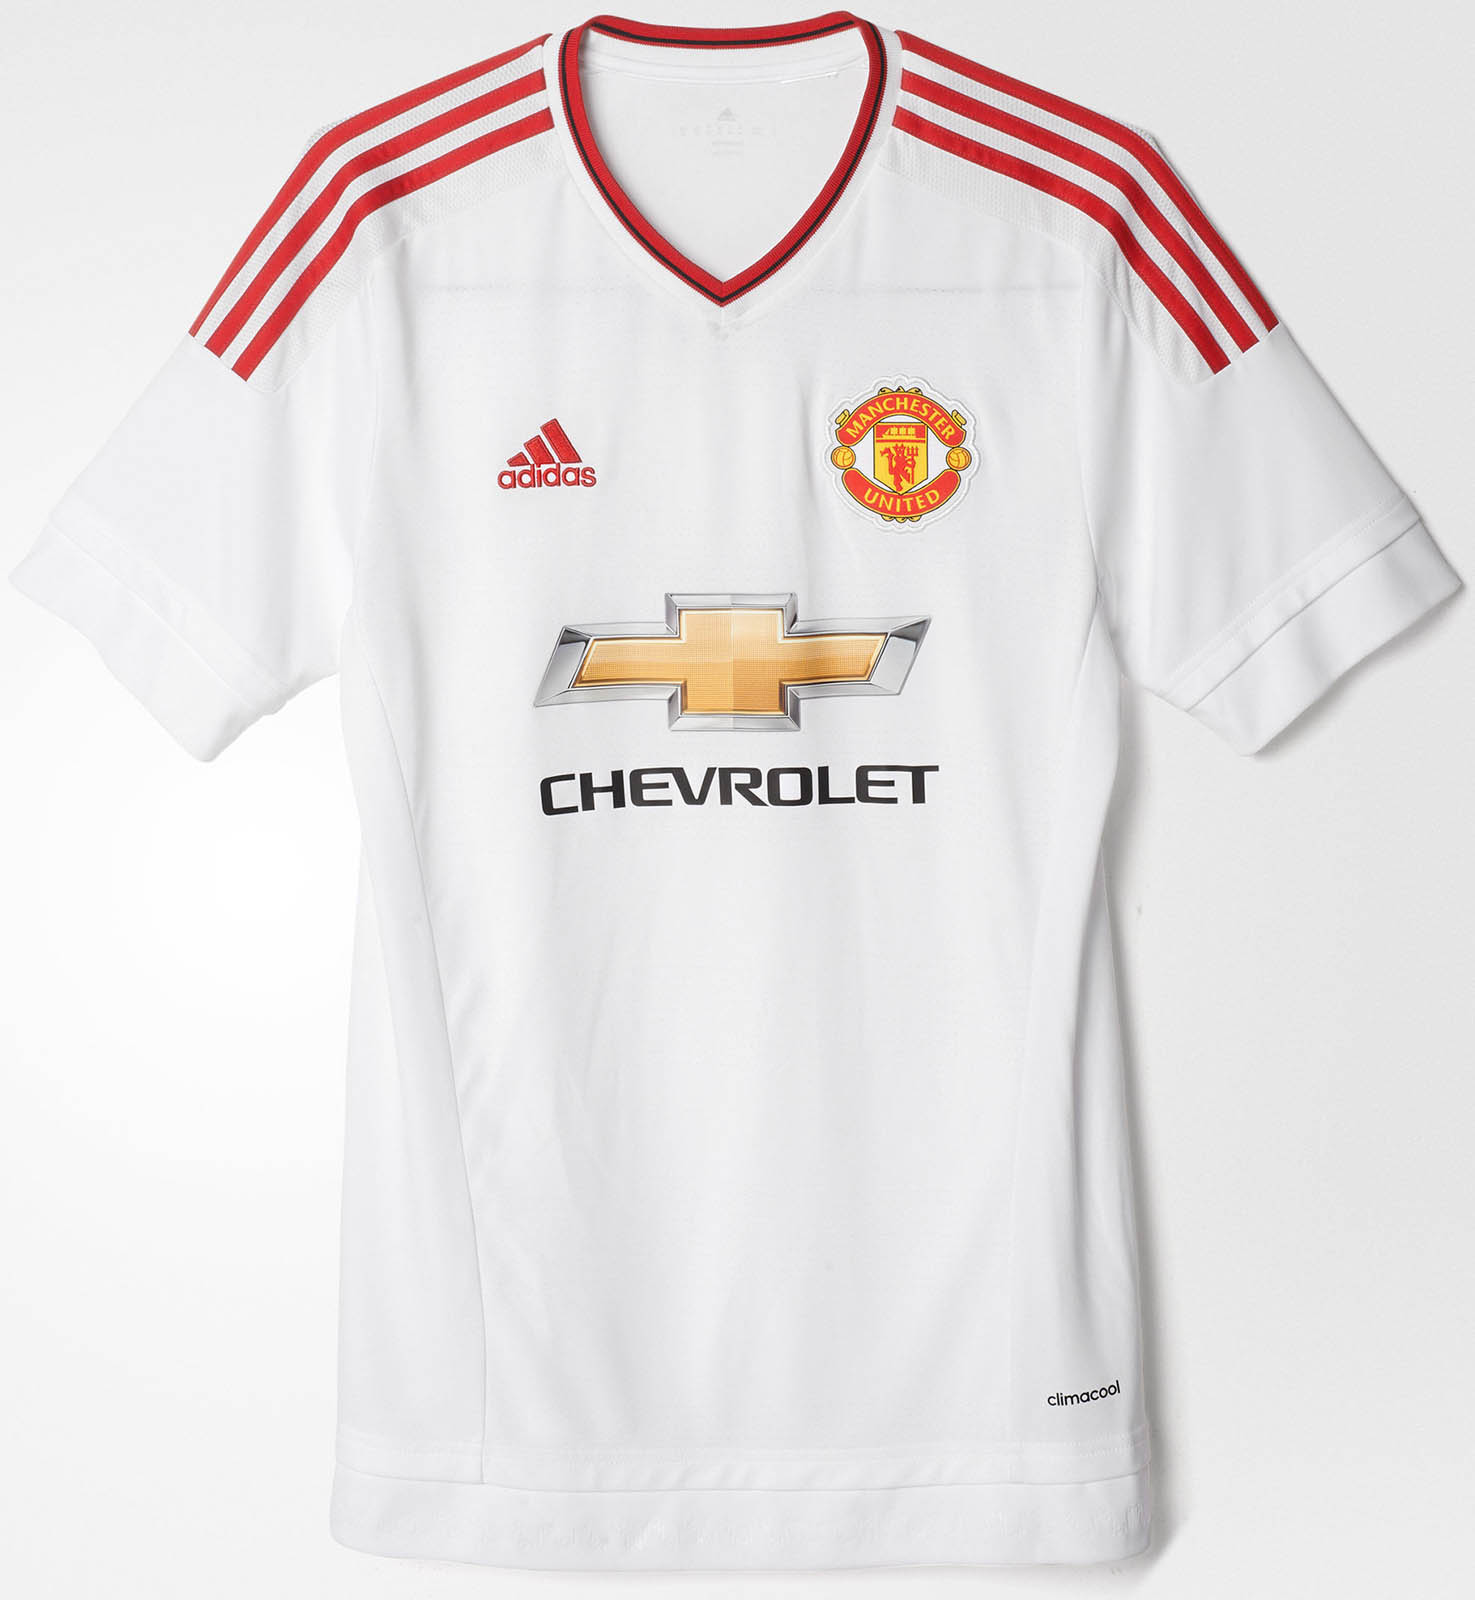 Adidas Manchester United 15 16 Kits Released Footy Headlines